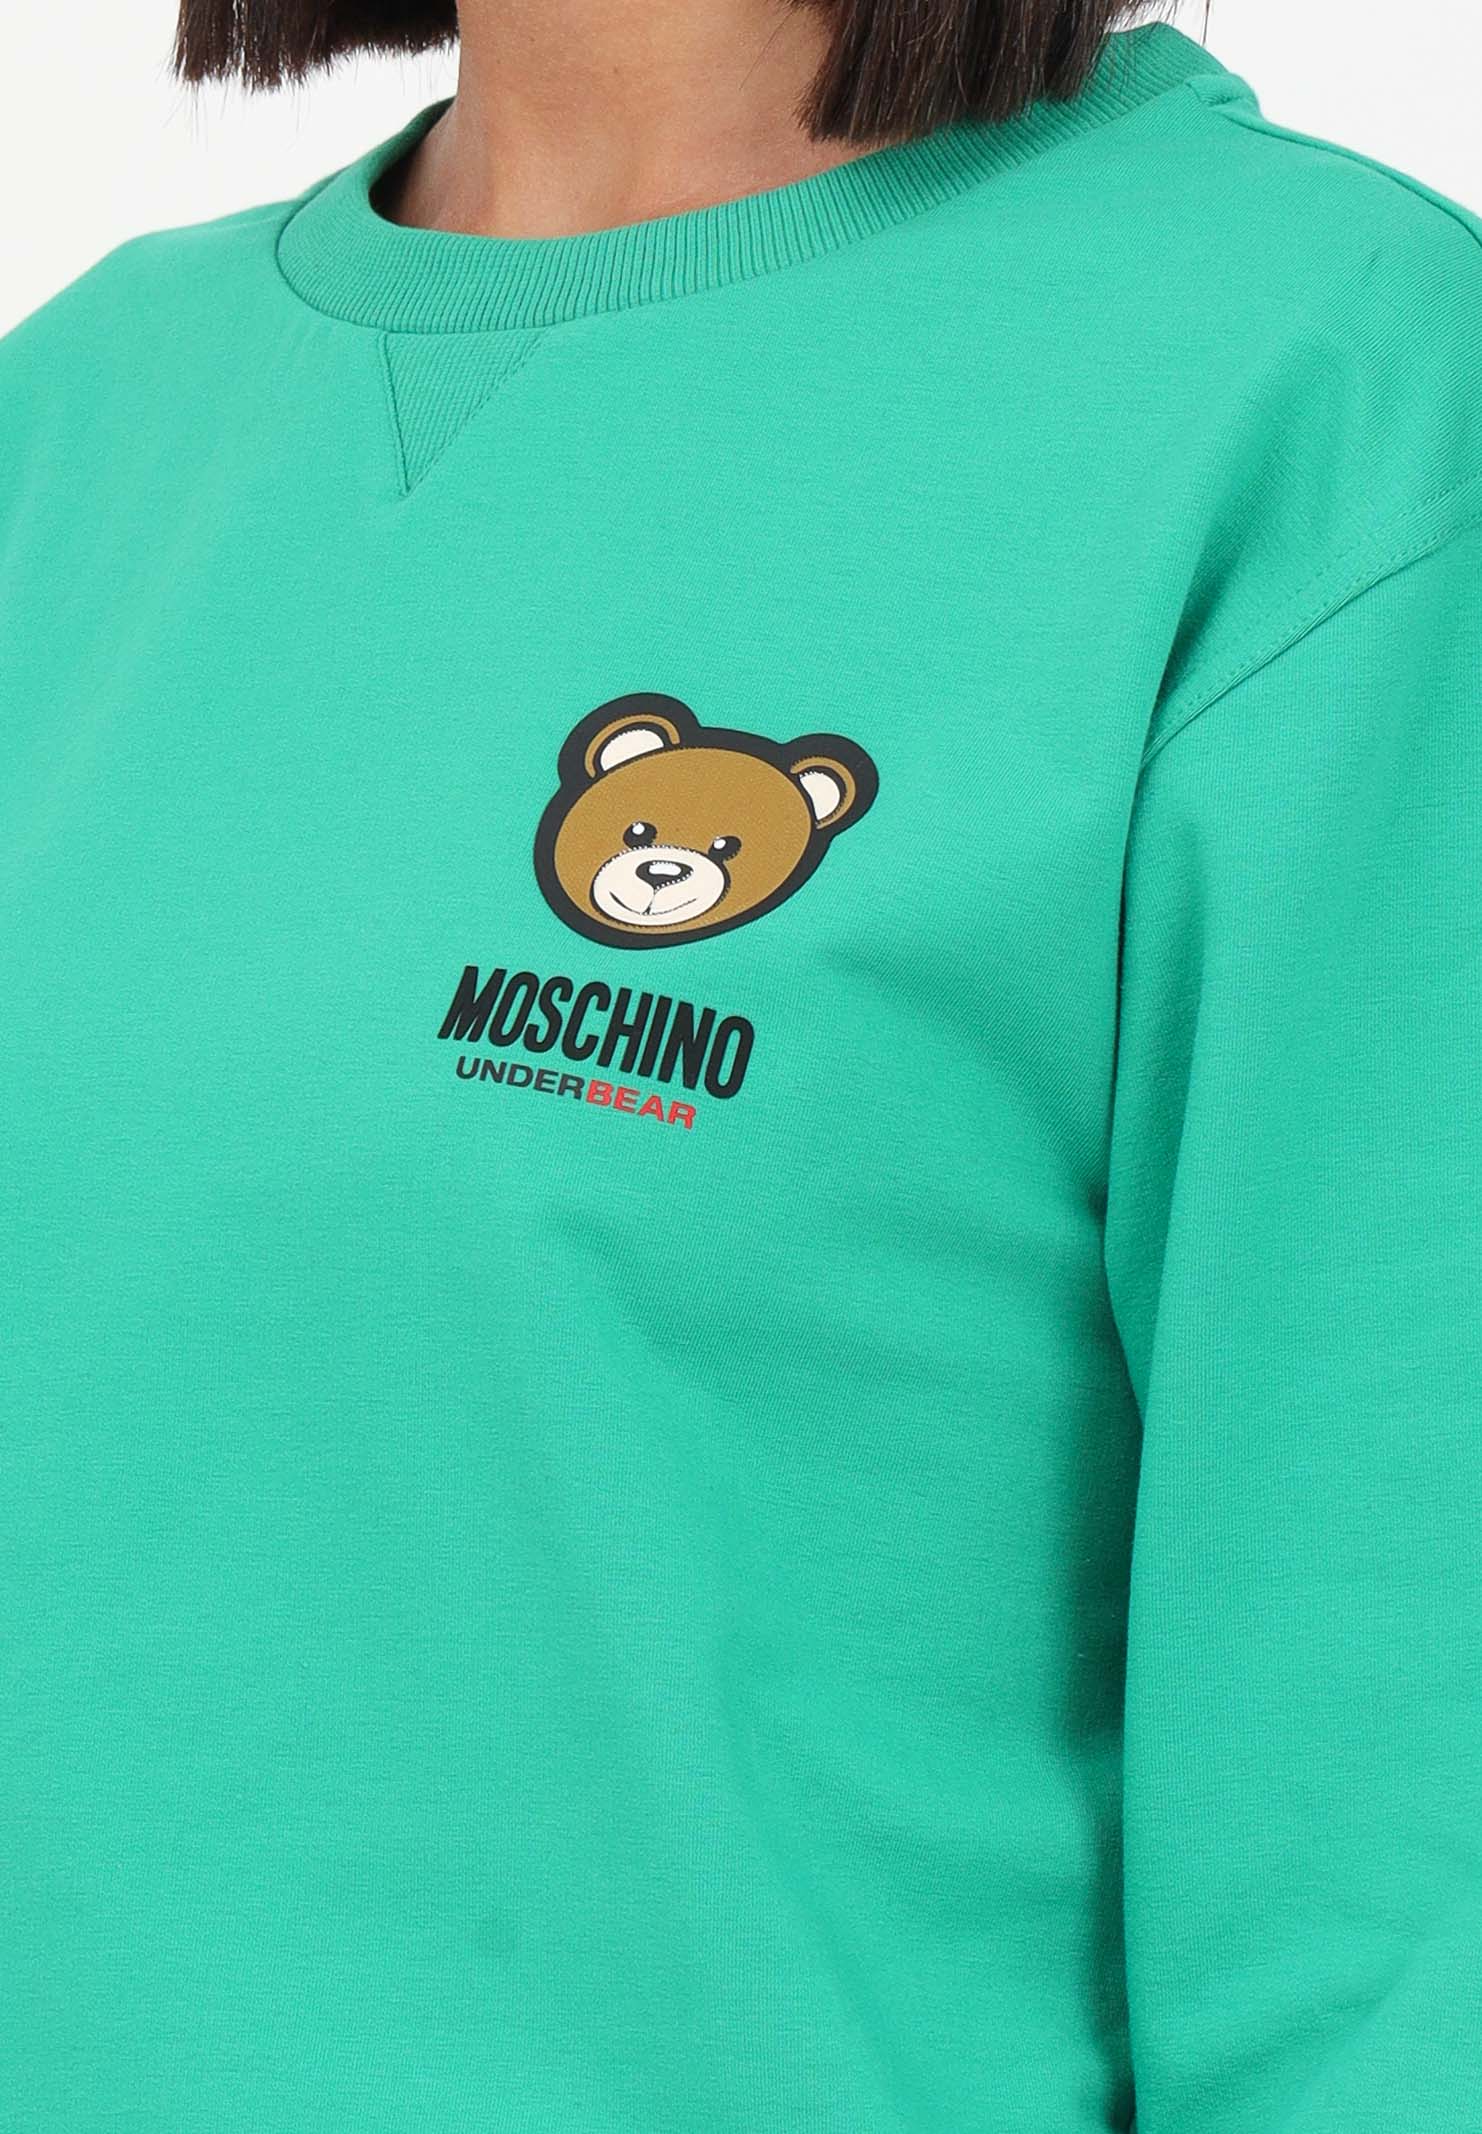 Green women's sweatshirt with logo and small teddy MOSCHINO | A179044130394